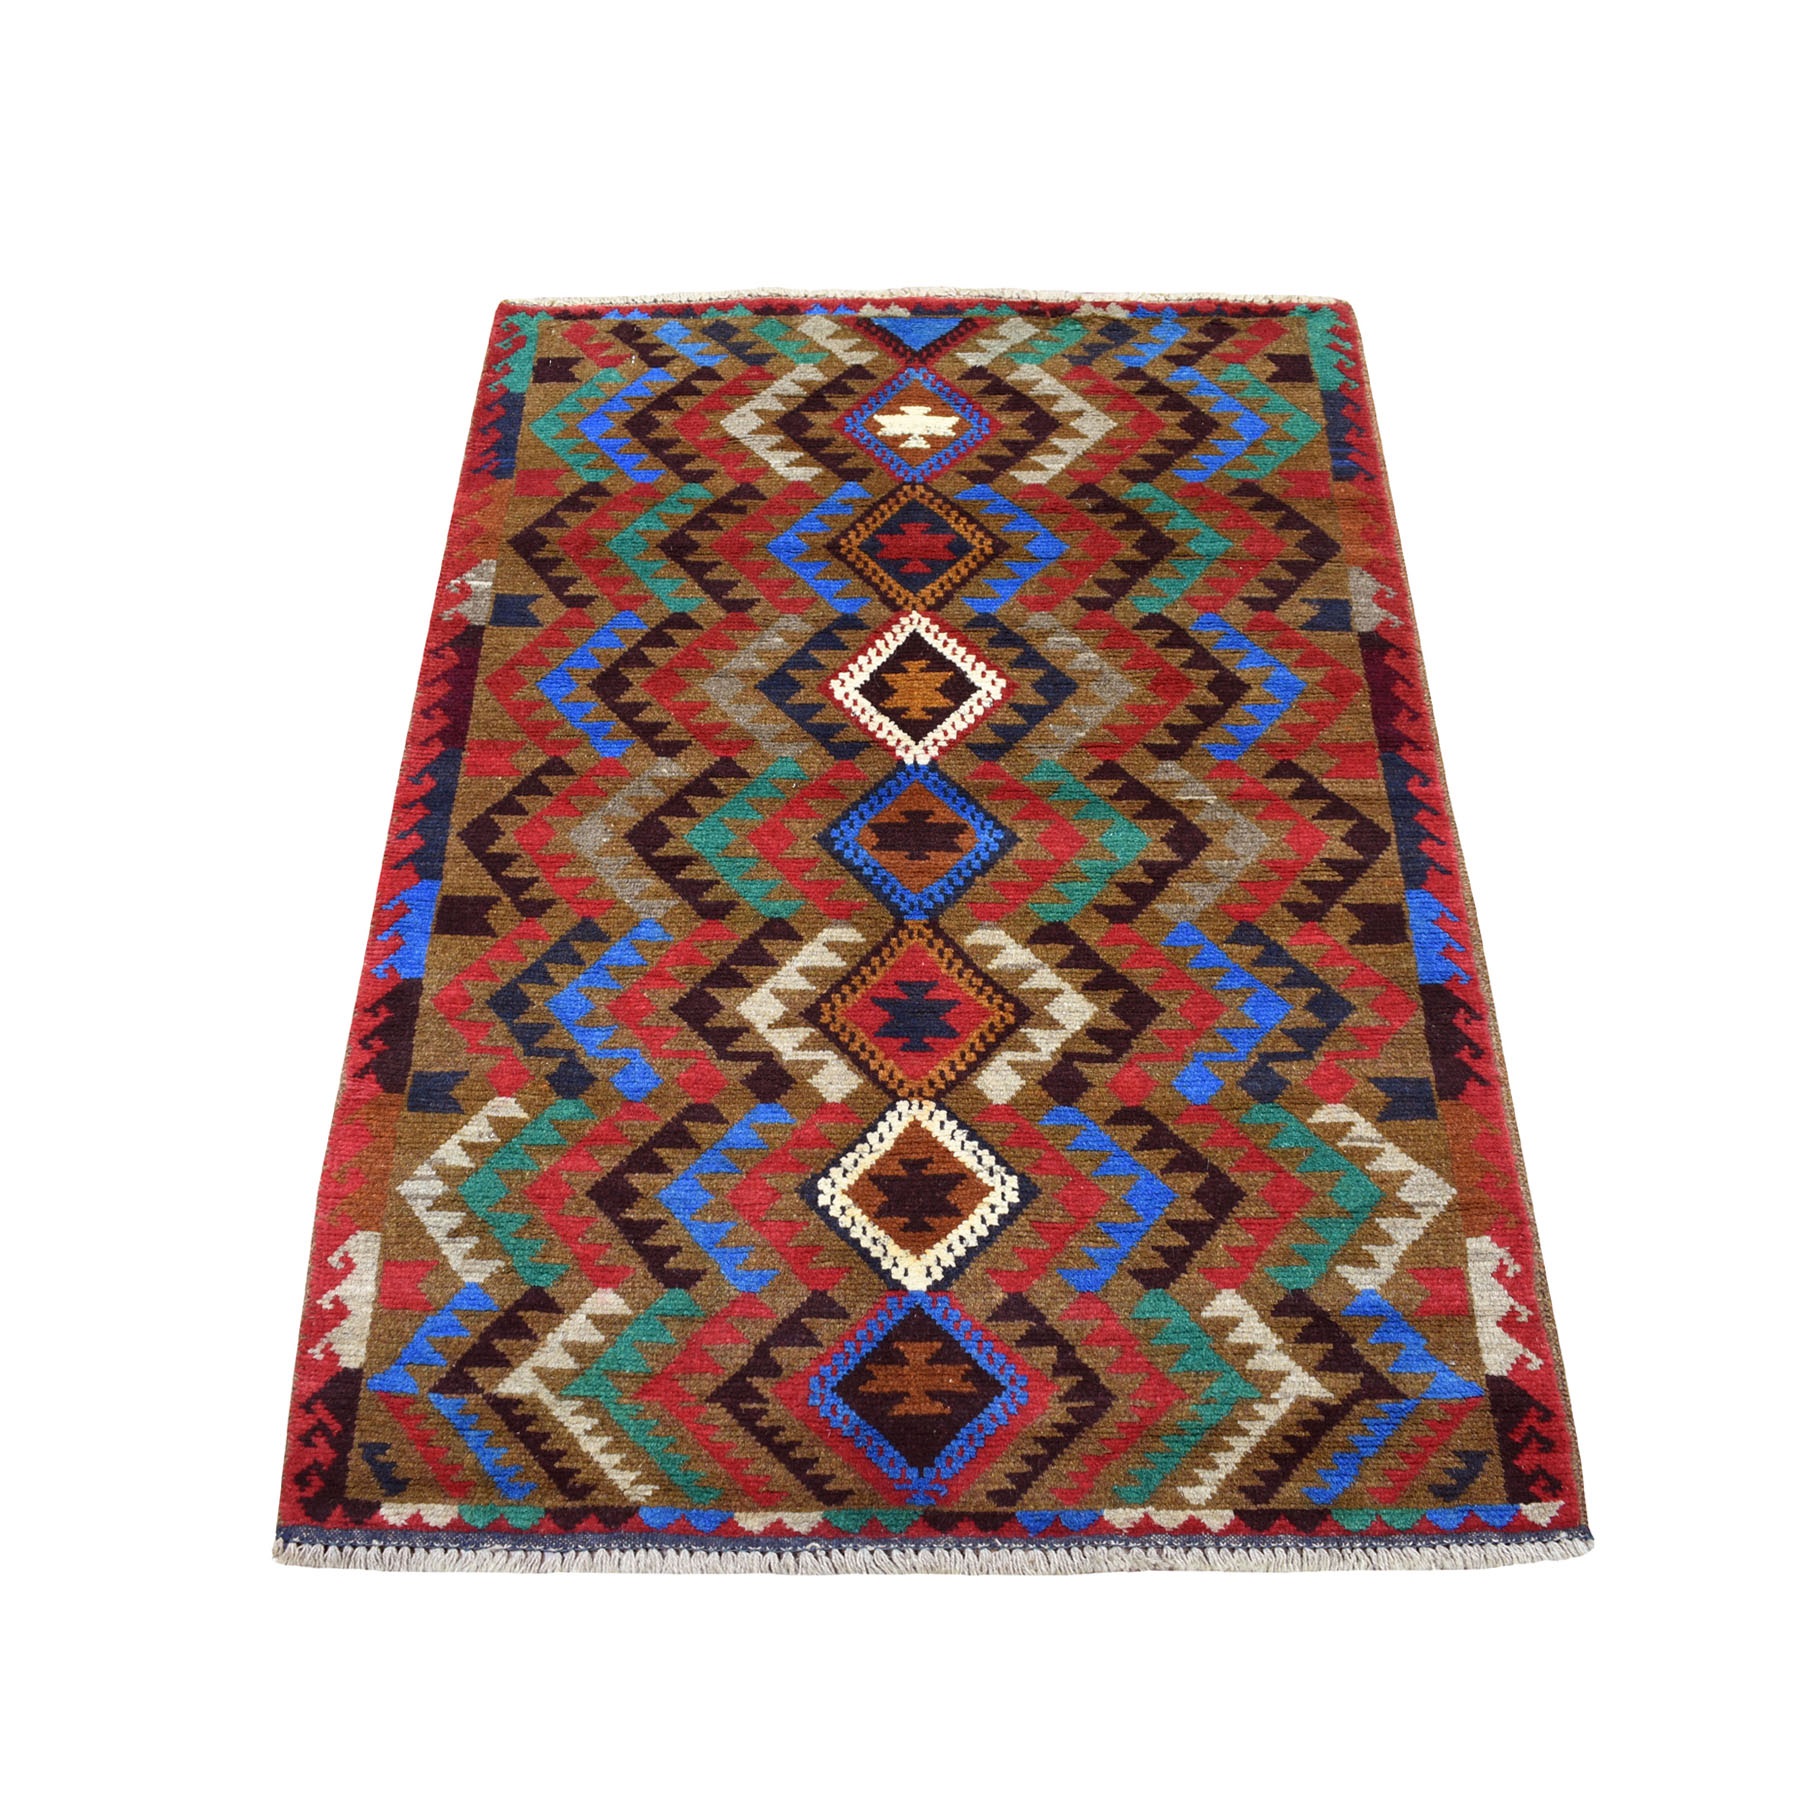 3'x4'6" Brown Hand Woven Tribal Design Colorful Afghan Baluch Pure Wool Oriental Rug 